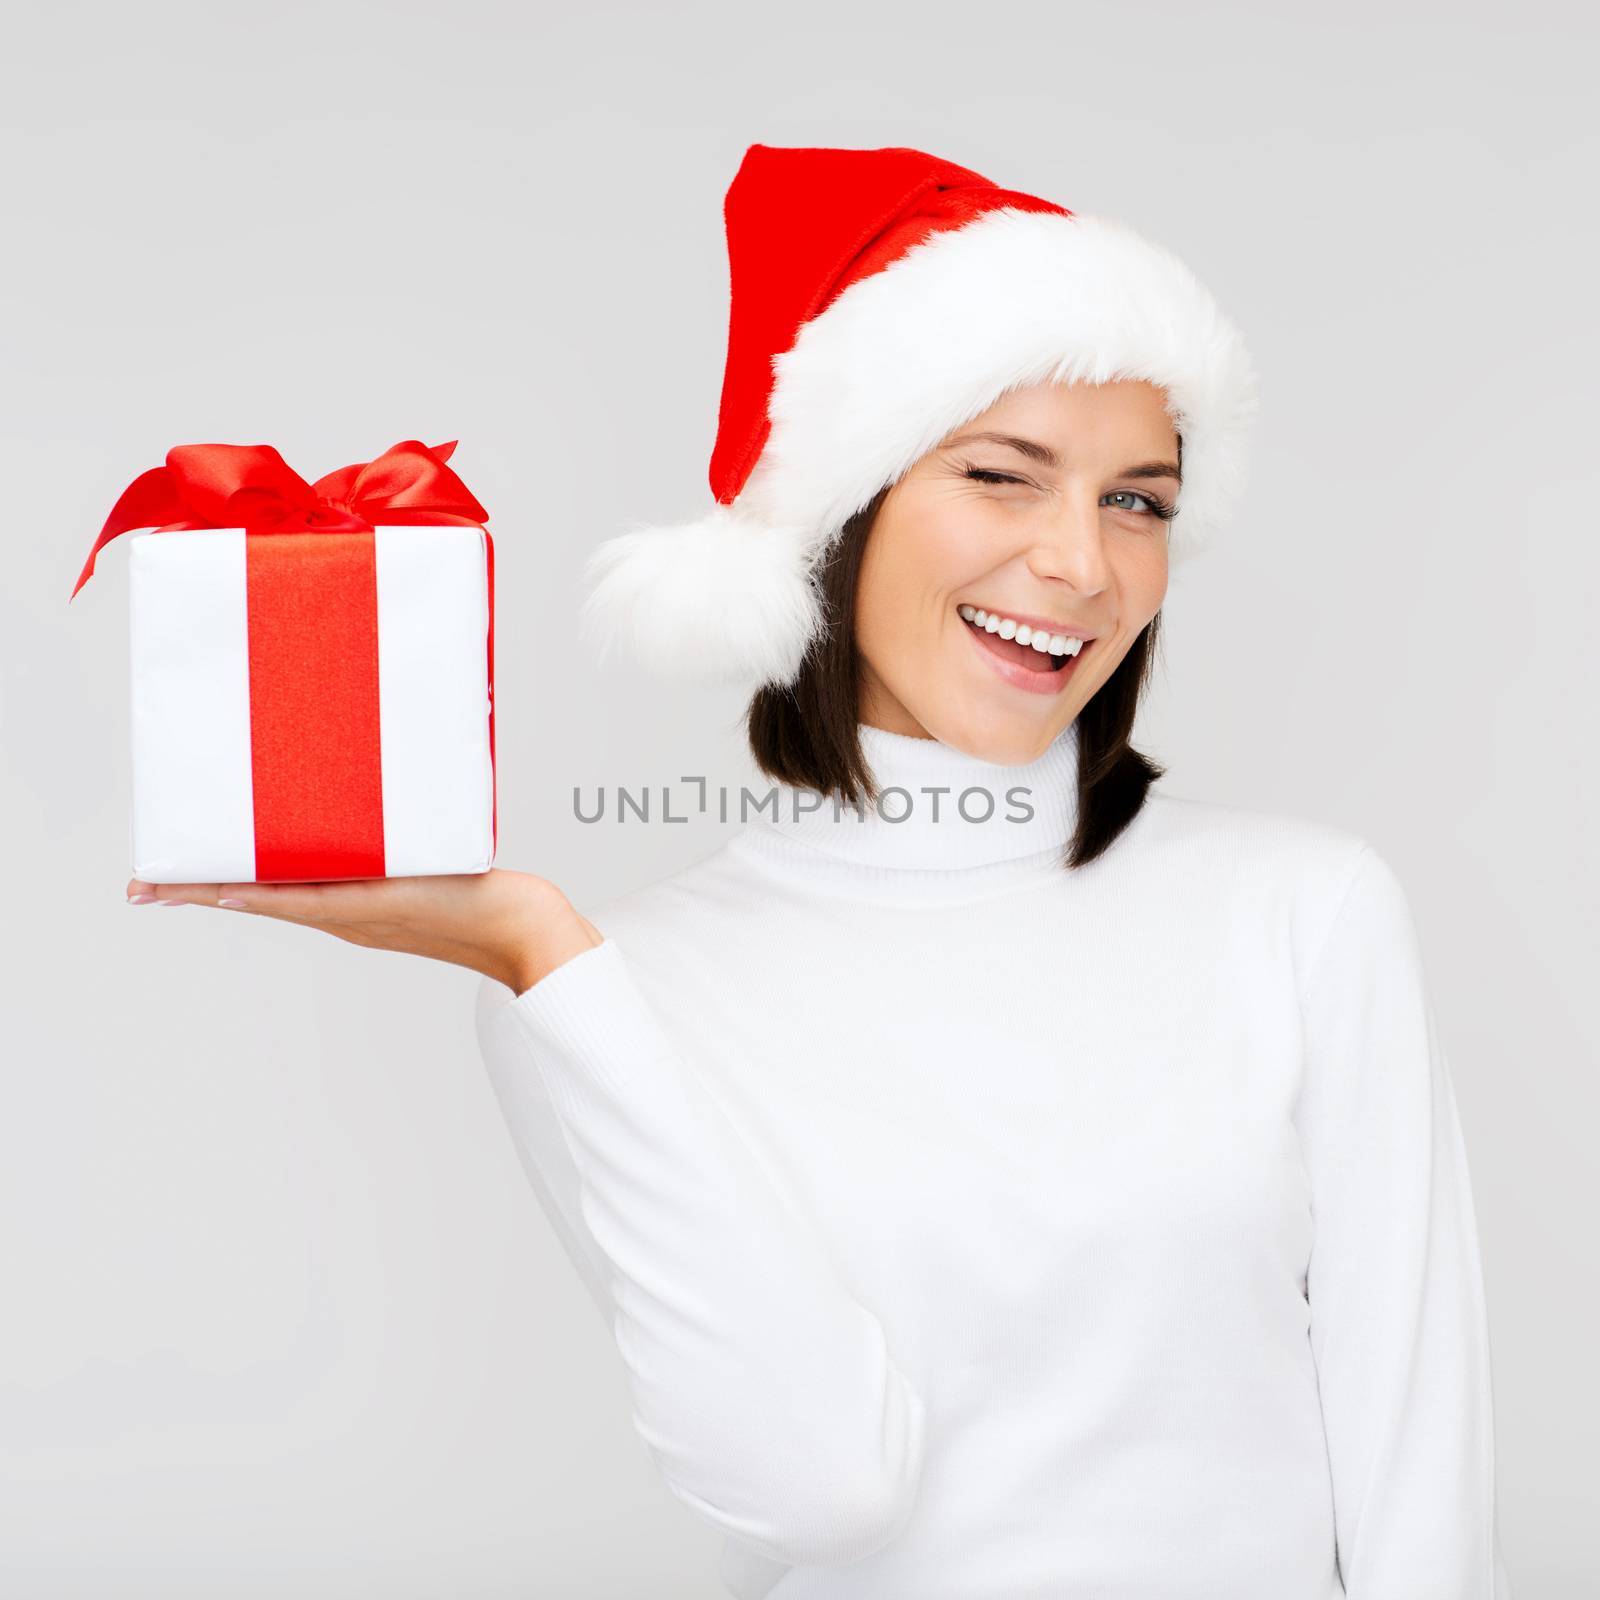 christmas, x-mas, winter, happiness concept - smiling woman in santa helper hat with gift box